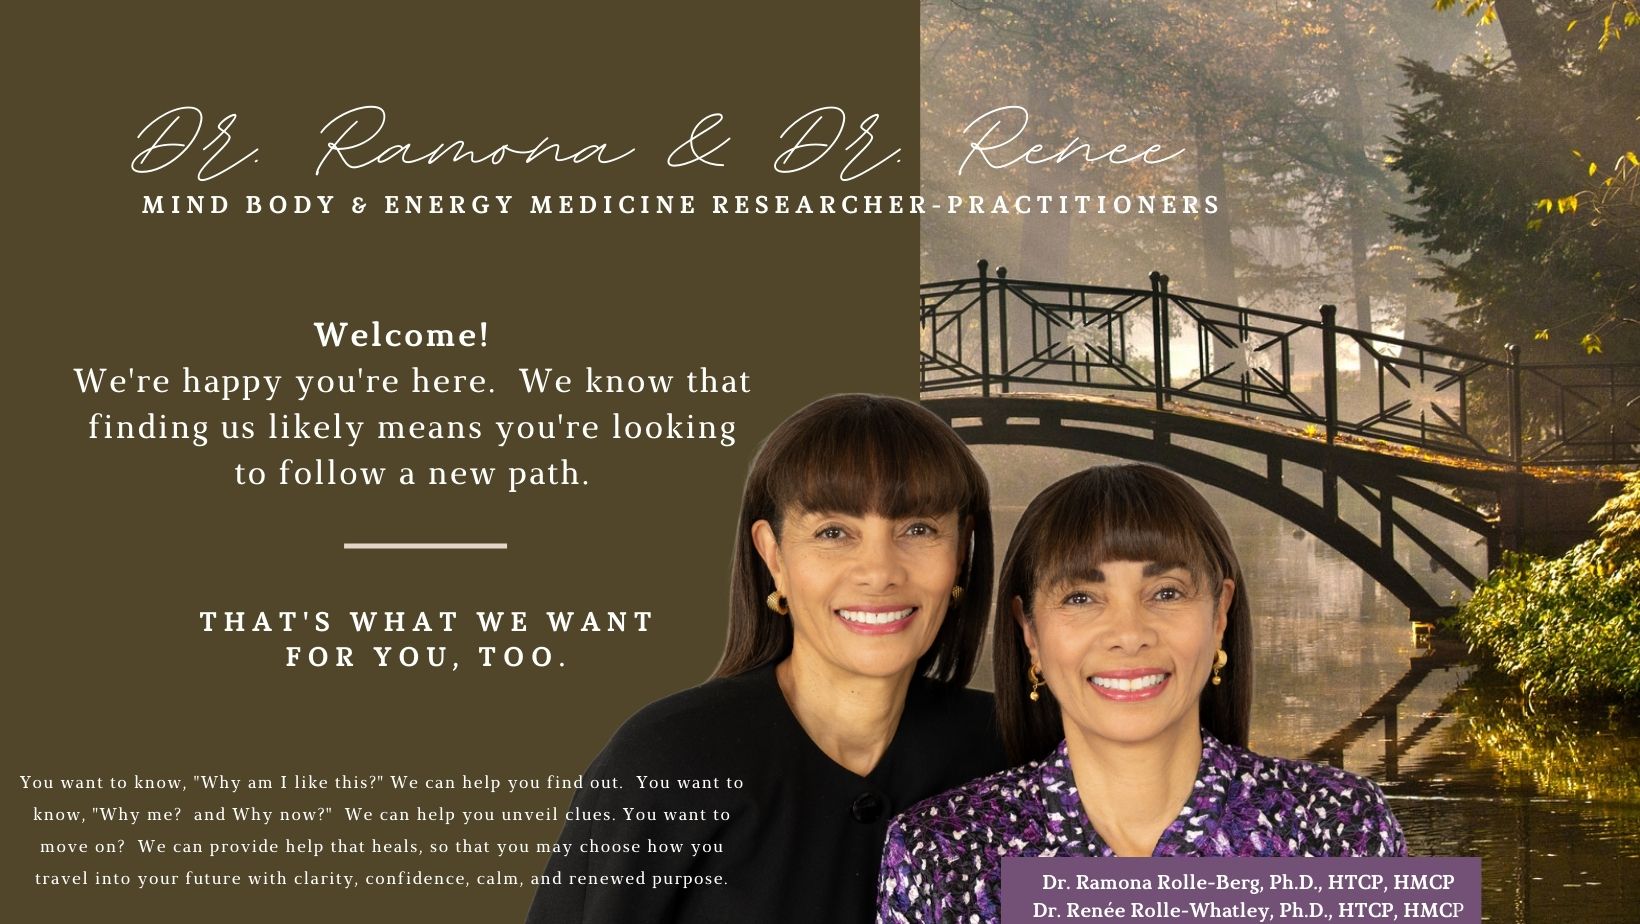 Welcome and photo of Dr. Ramona Rolle-Berg, Ph.D. and Dr. Renee Rolle-Whatley, Ph.D.